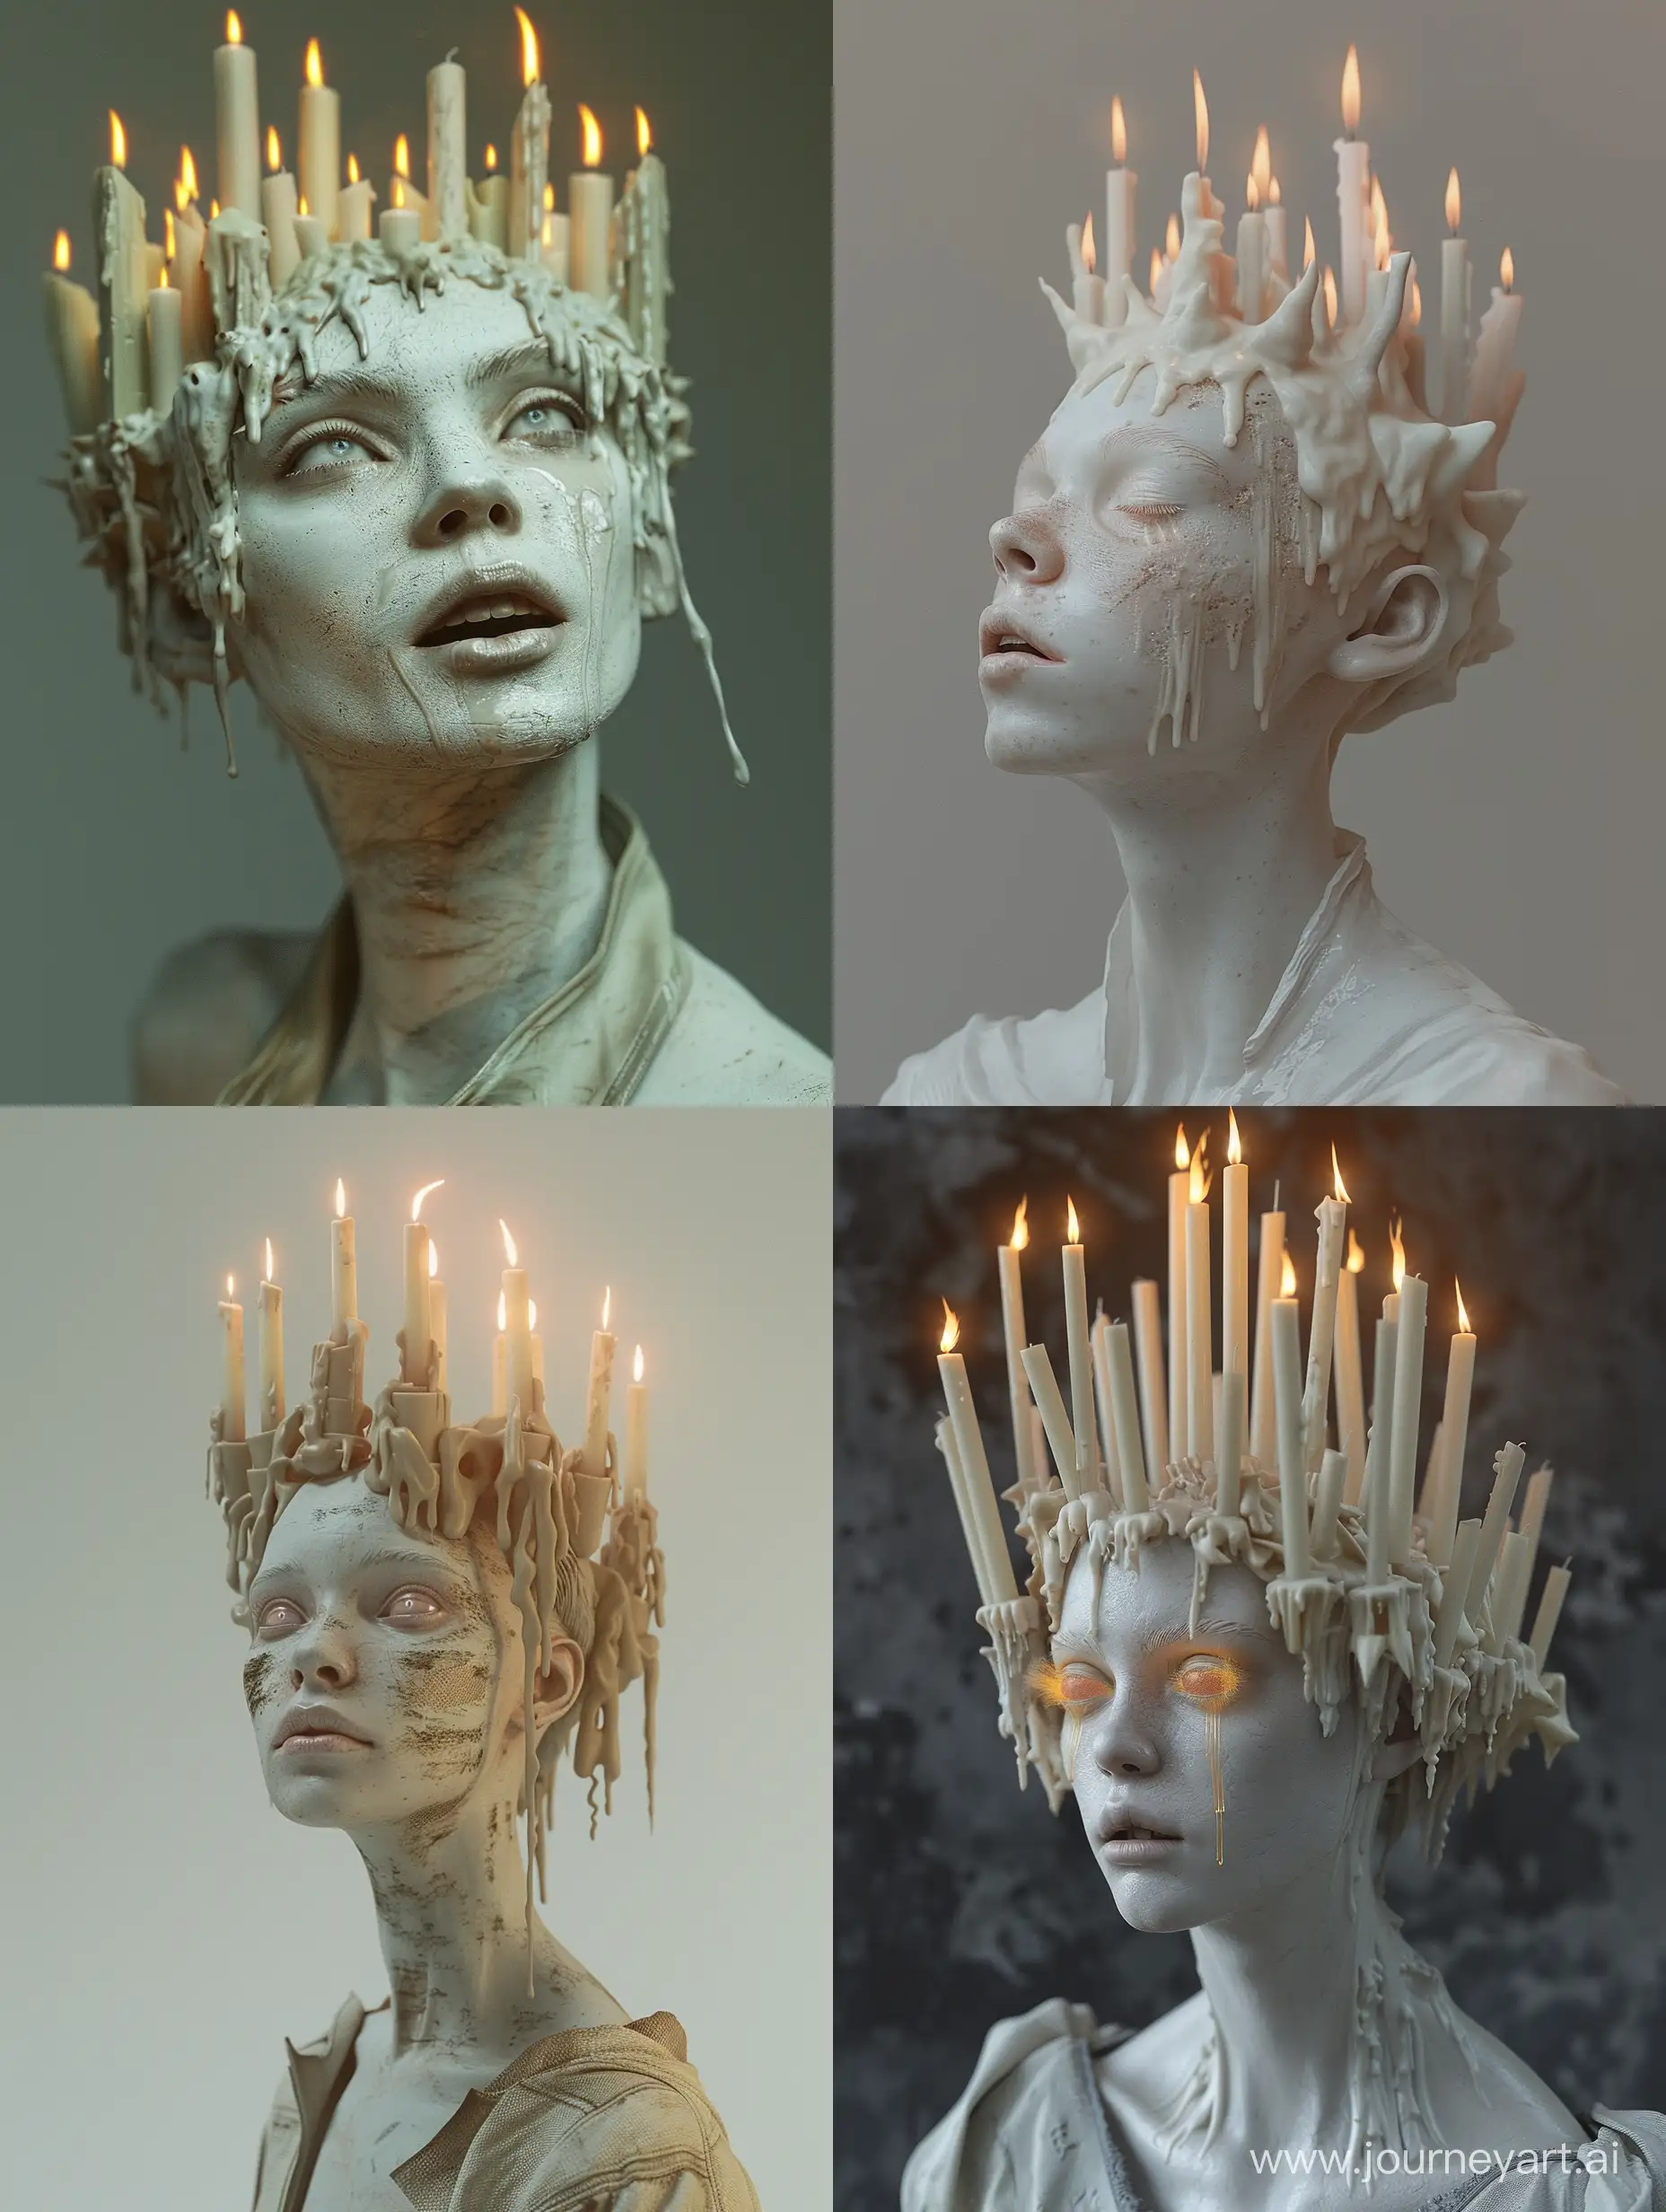 a statue of a woman with candles on her head, a surrealist sculpture, inspired by Yanjun Cheng, tumblr, with pale skin, all face covered with a fire, angelina stroganova, daily render